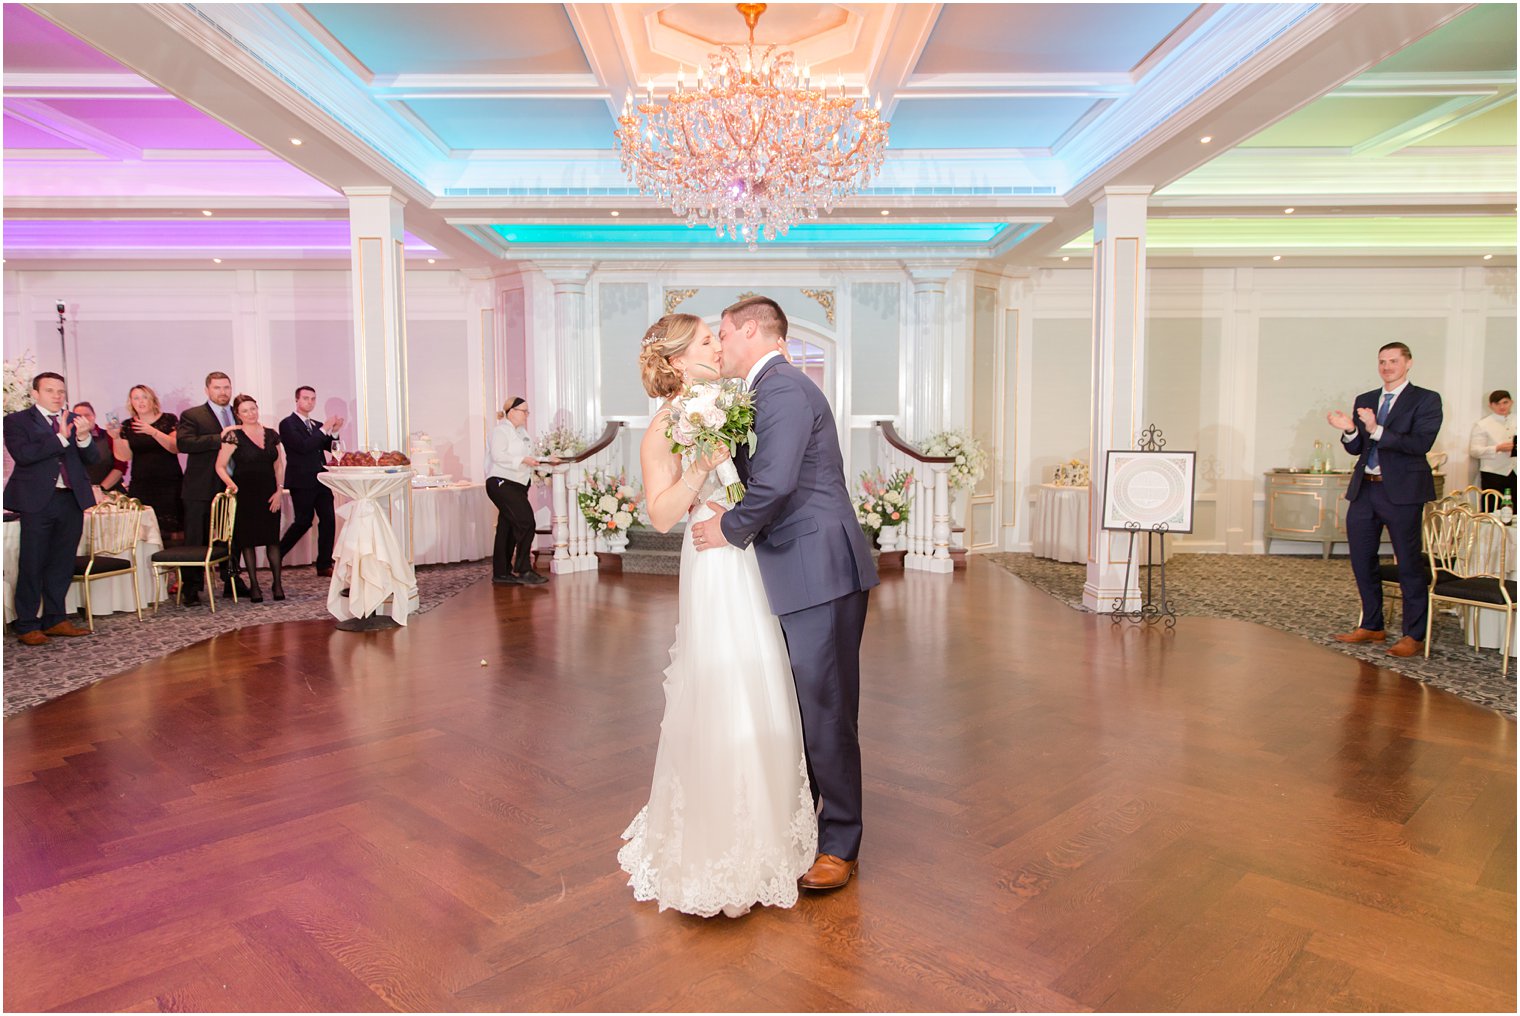 Bride and groom dancing at reception at The Mill Lakeside Manor